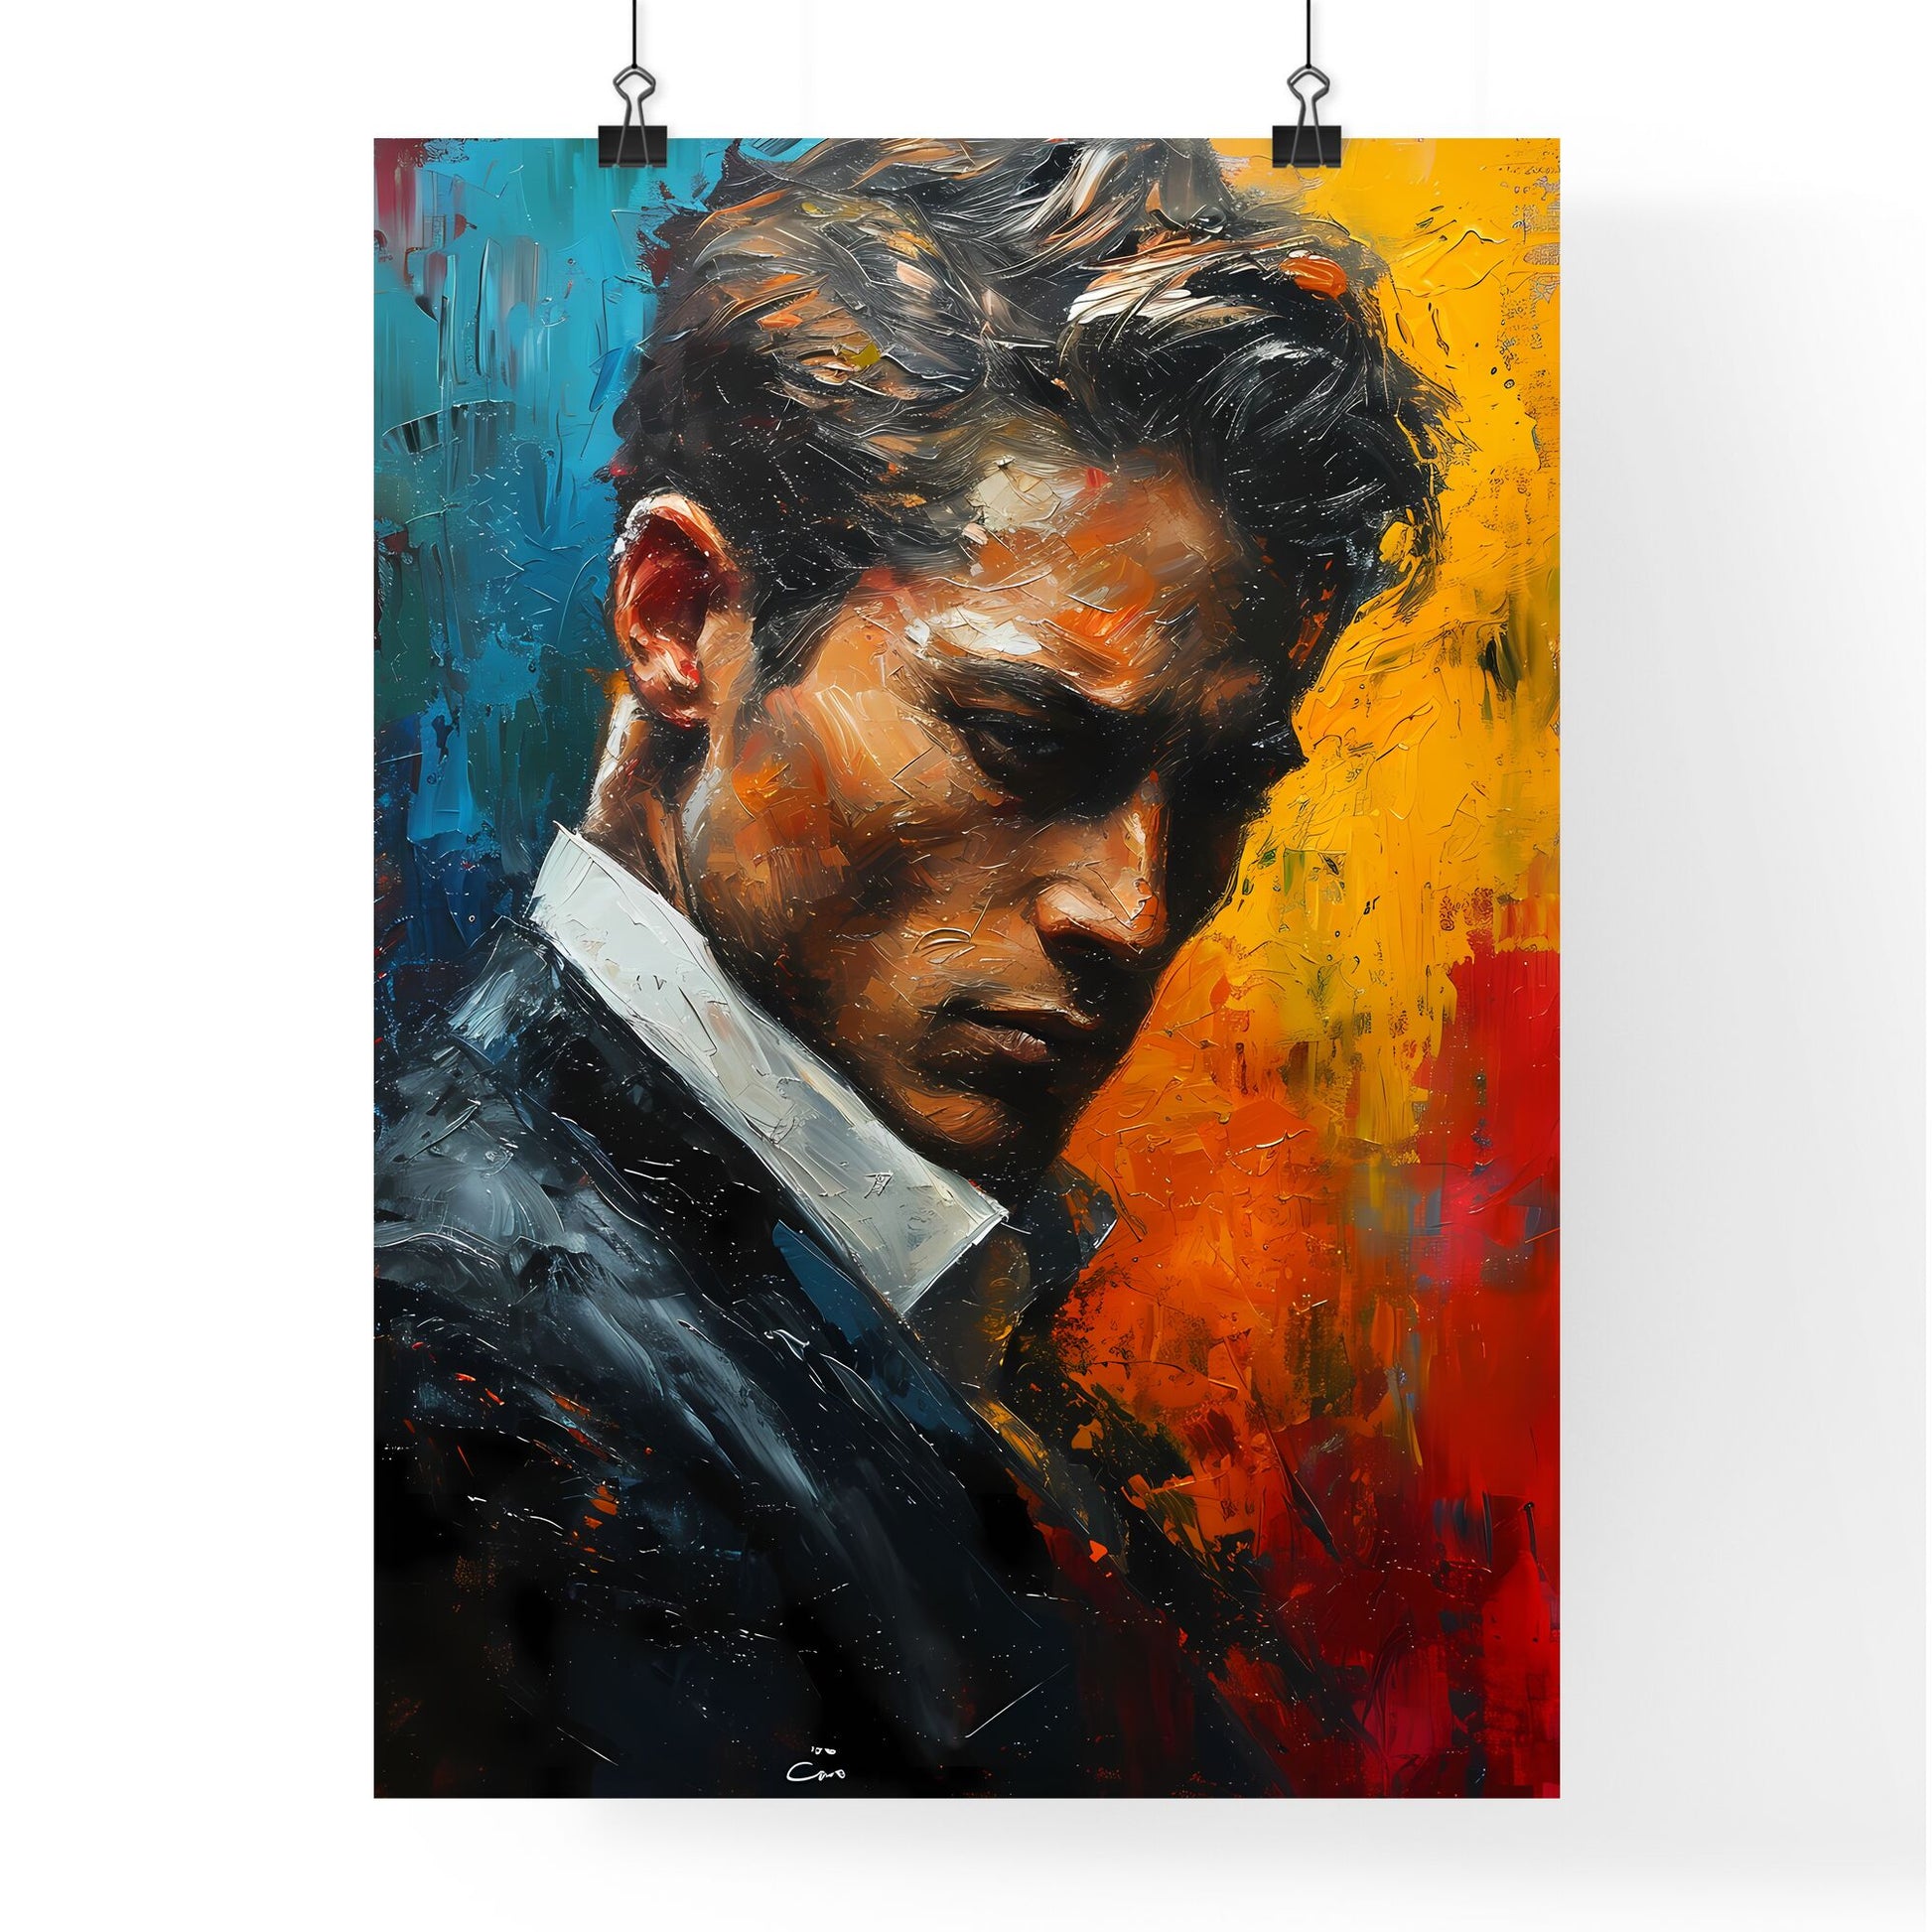 A Poster of Gordon Gekko Portrait with colorful Background - A Painting Of A Man Default Title